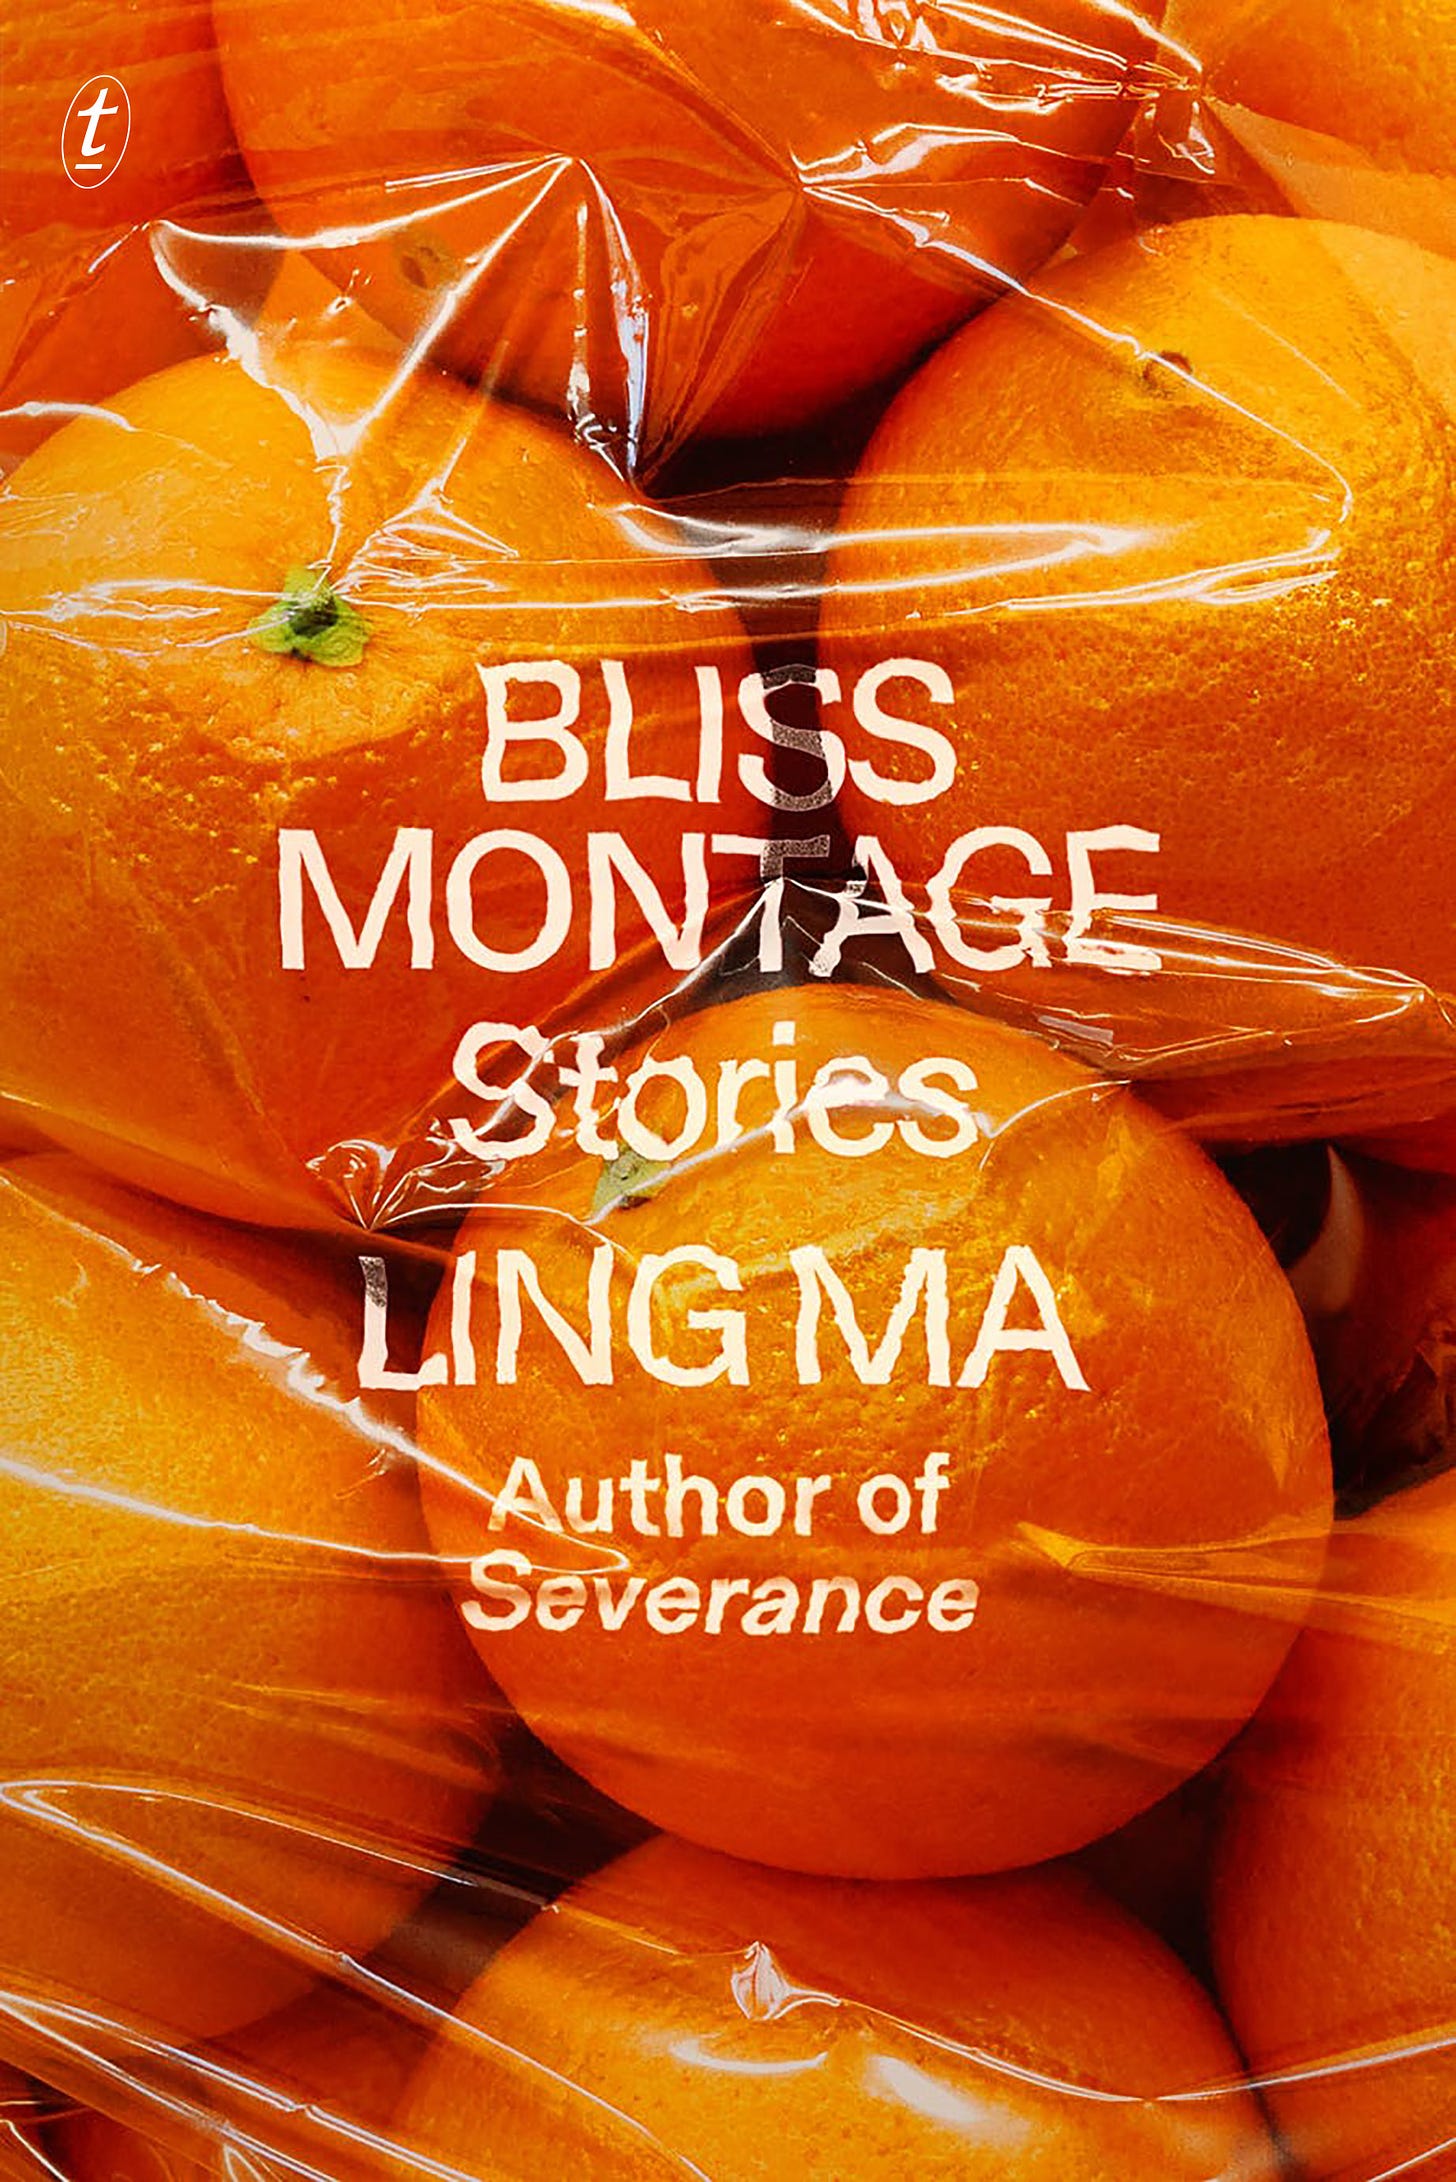 Photo of the cover of Ling Ma's Bliss Montage. Features a bag of oranges with title and author name overlaid in white text